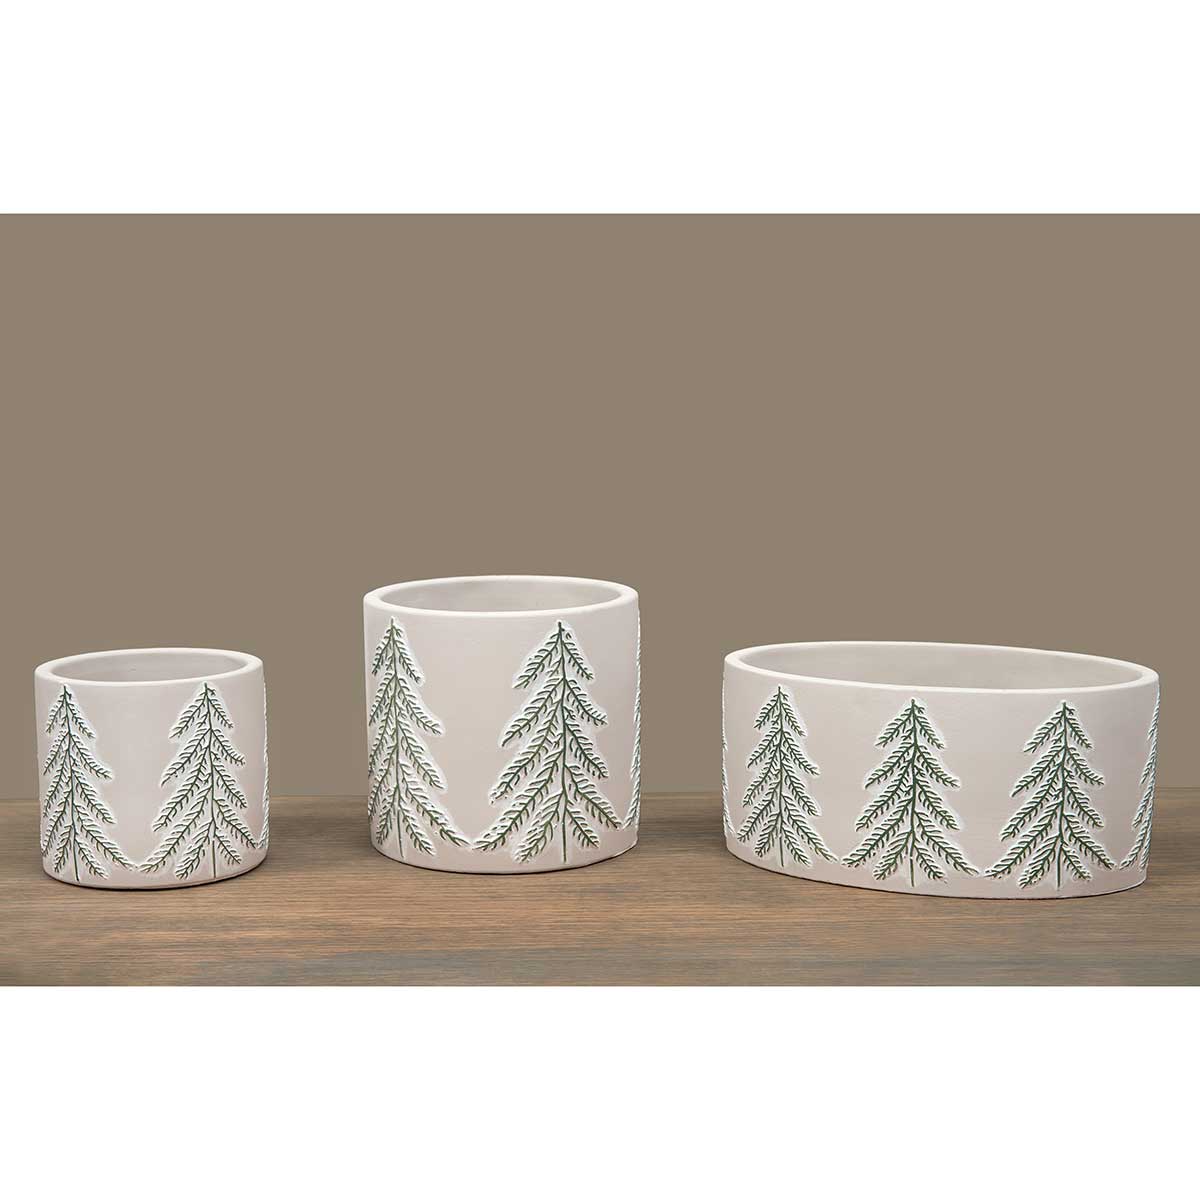 POT WINTER GREEN TREE OVAL 8.5IN X 5IN X 4IN CREAM/GREEN - Click Image to Close